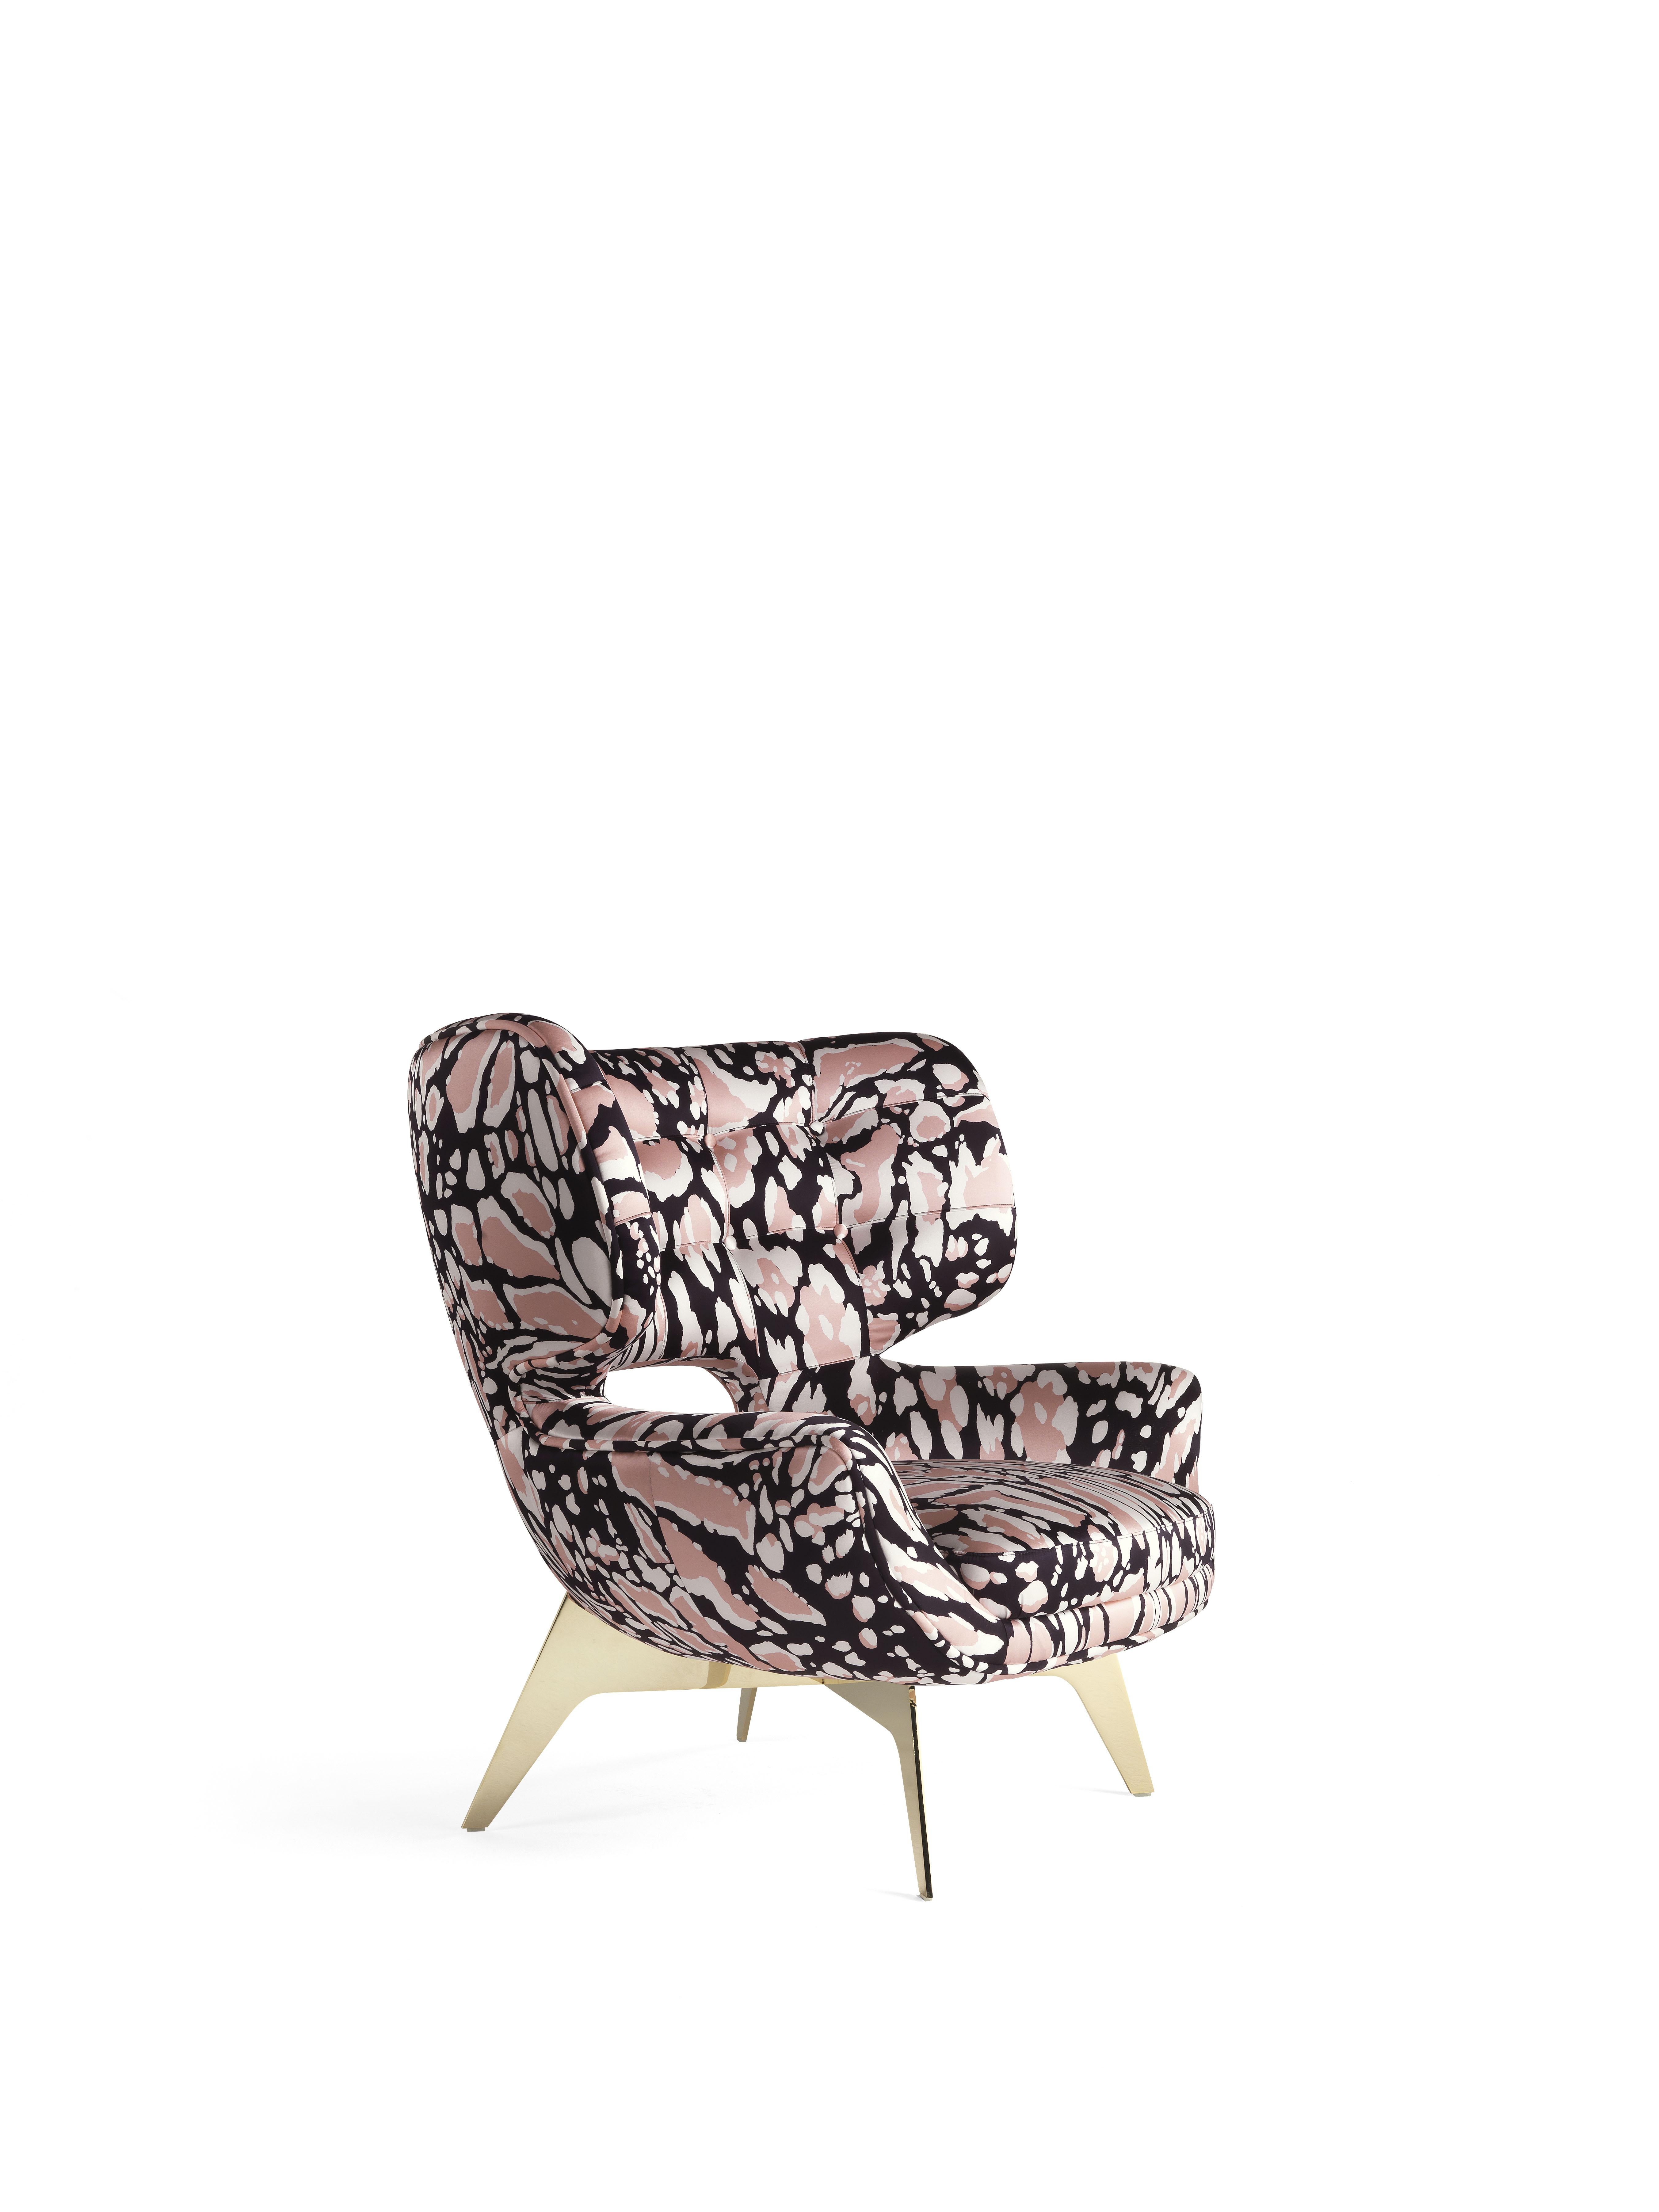 With a distinctive 1950s style, the exuberant and refined armchair lends a chic and contemporary touch to the living room. Maclaine comes in different finishings; in this case, it is upholstered in the new silk with lynx print.
Maclaine Armchair